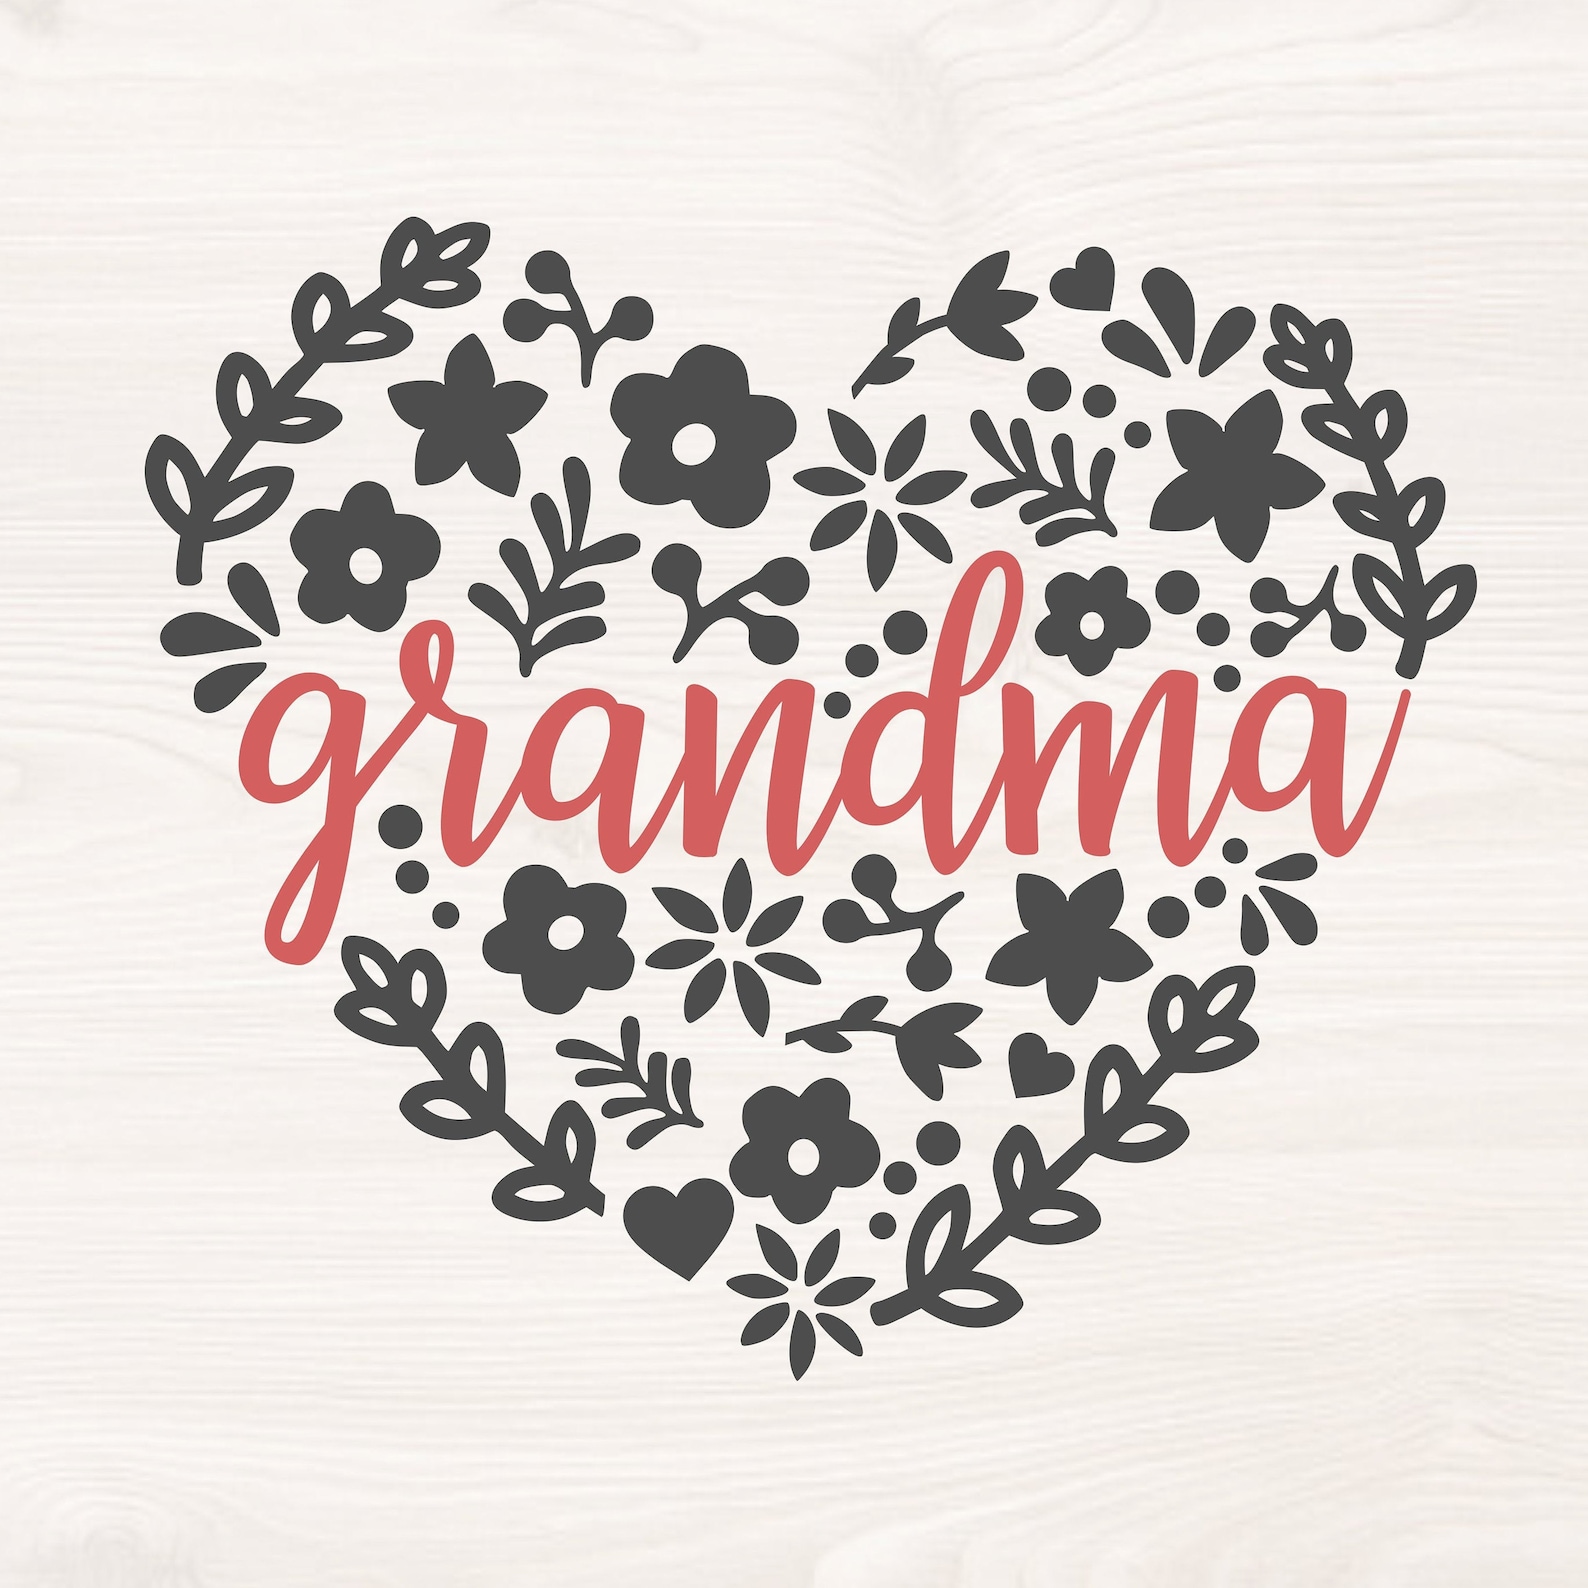 grandma-heart-floral-svg-png-files-for-cutting-machines-etsy-canada